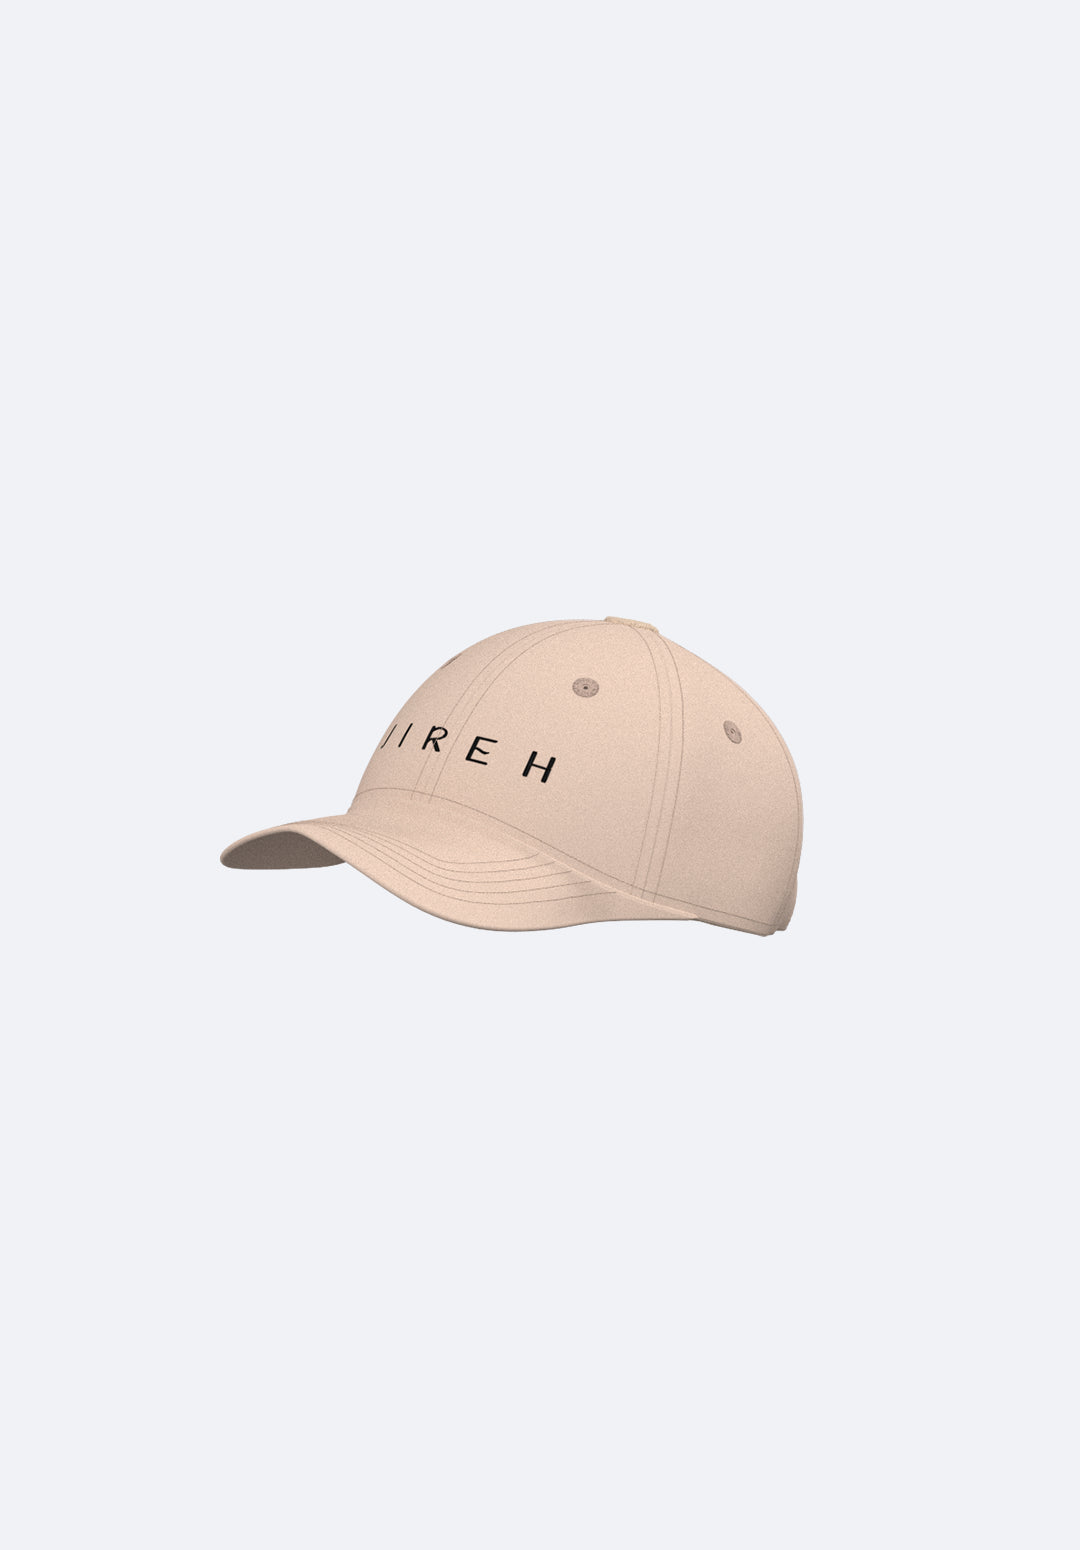 Jireh Text Embroidery Cap